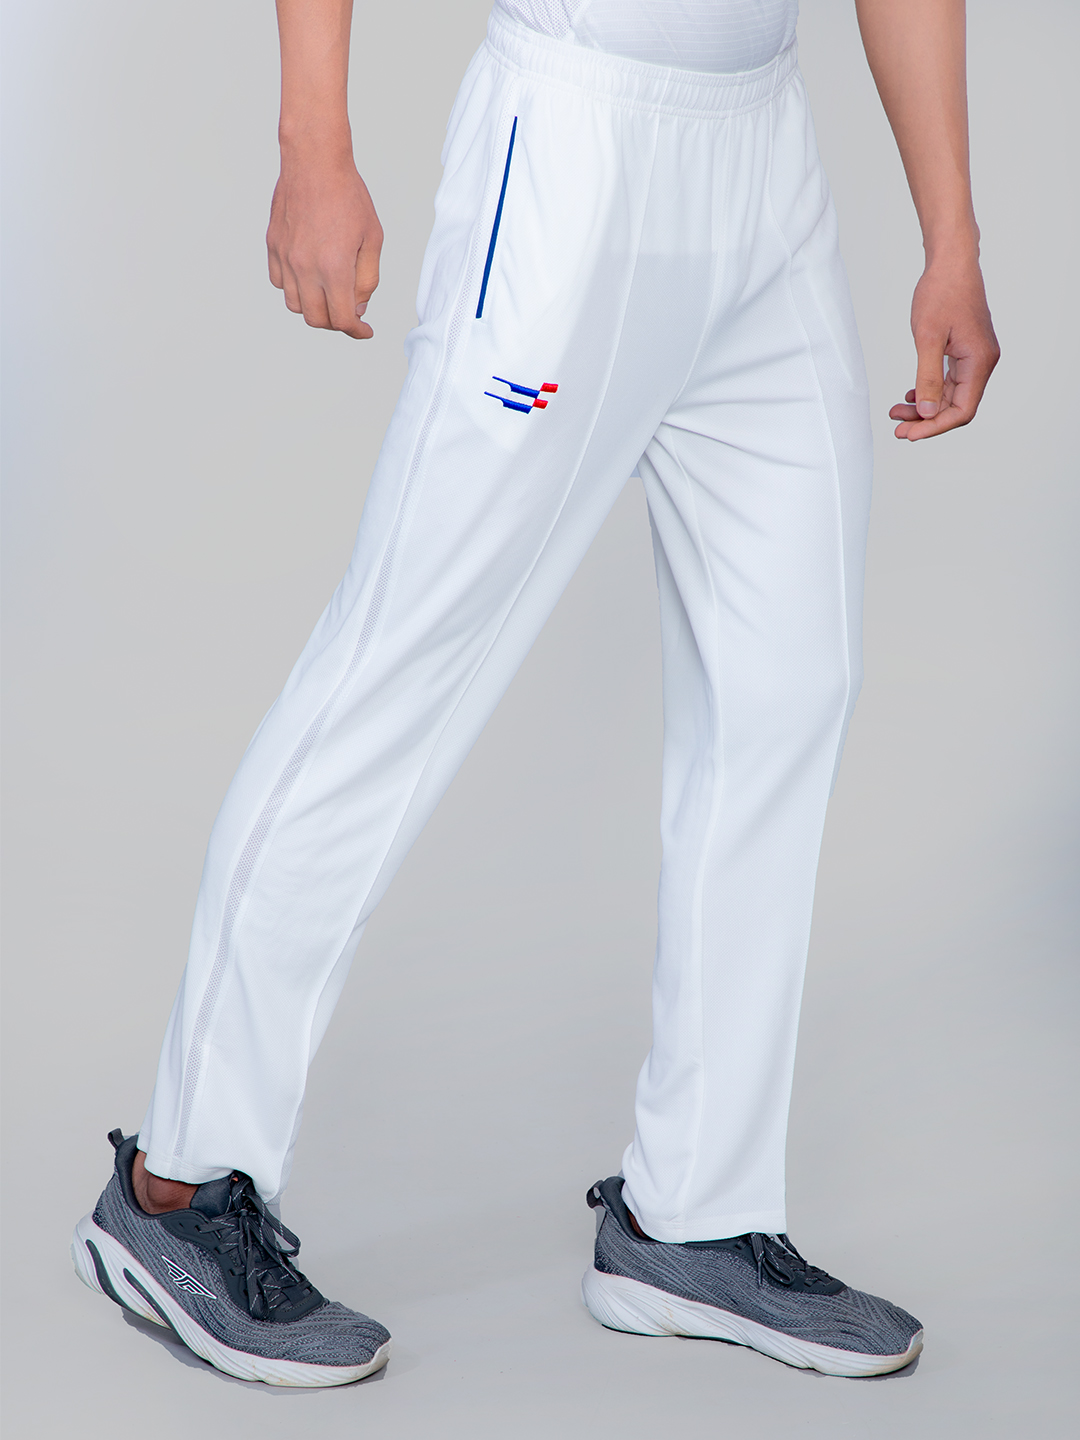 CSW SPORT DESIGN YOUR OWN CRICKET PANT - Canterbury Sports Wholesale